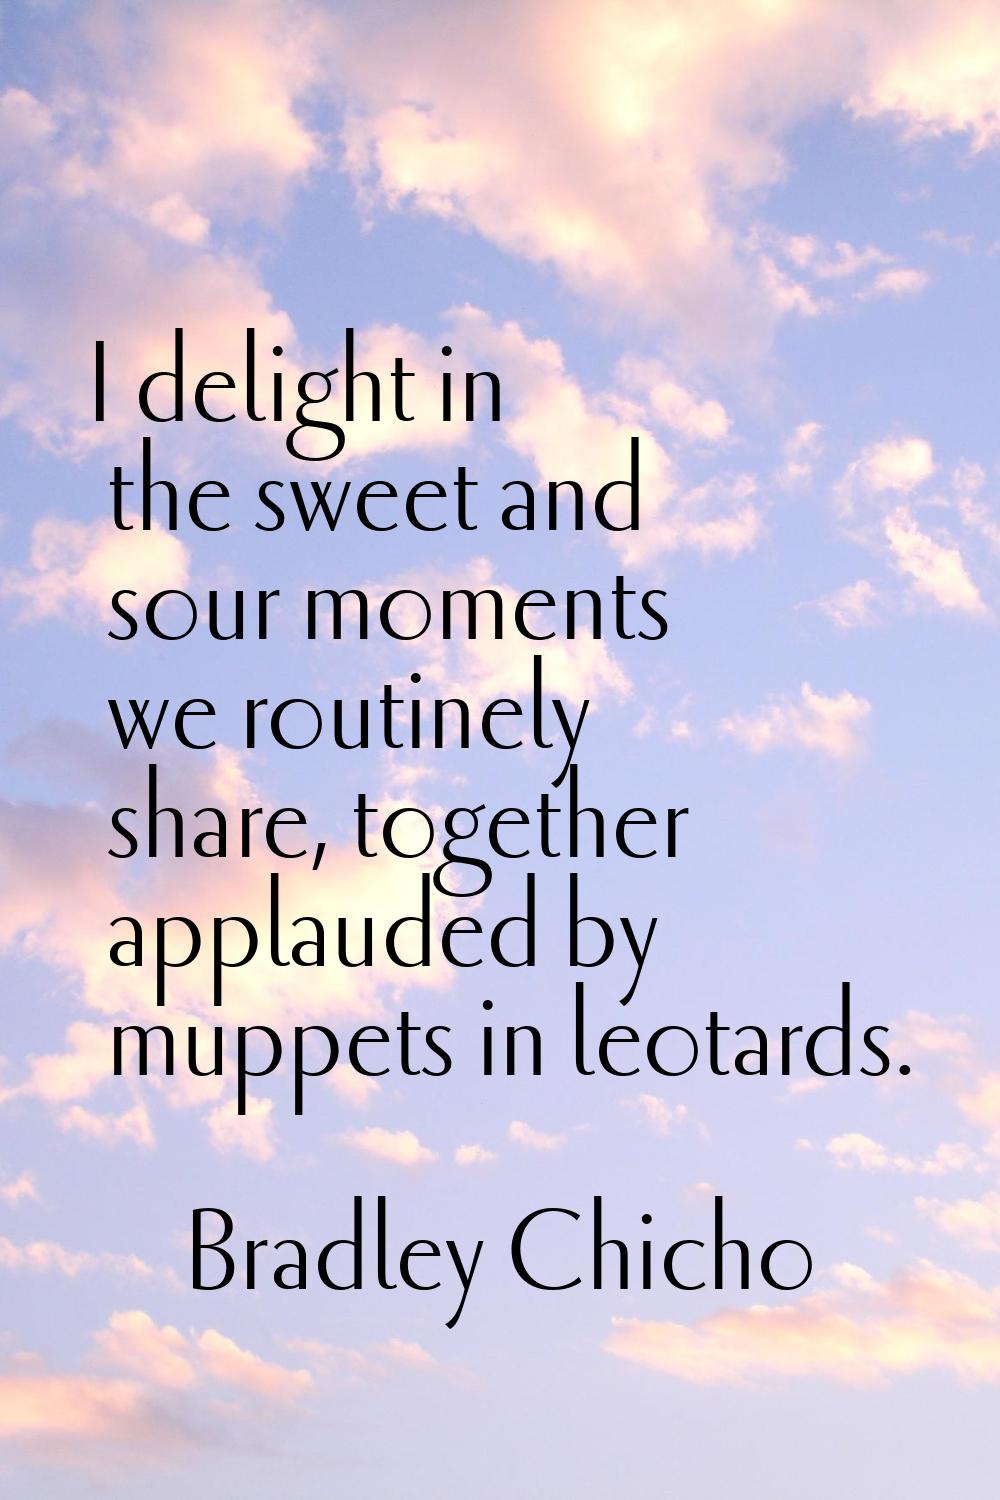 I delight in the sweet and sour moments we routinely share, together applauded by muppets in leotar